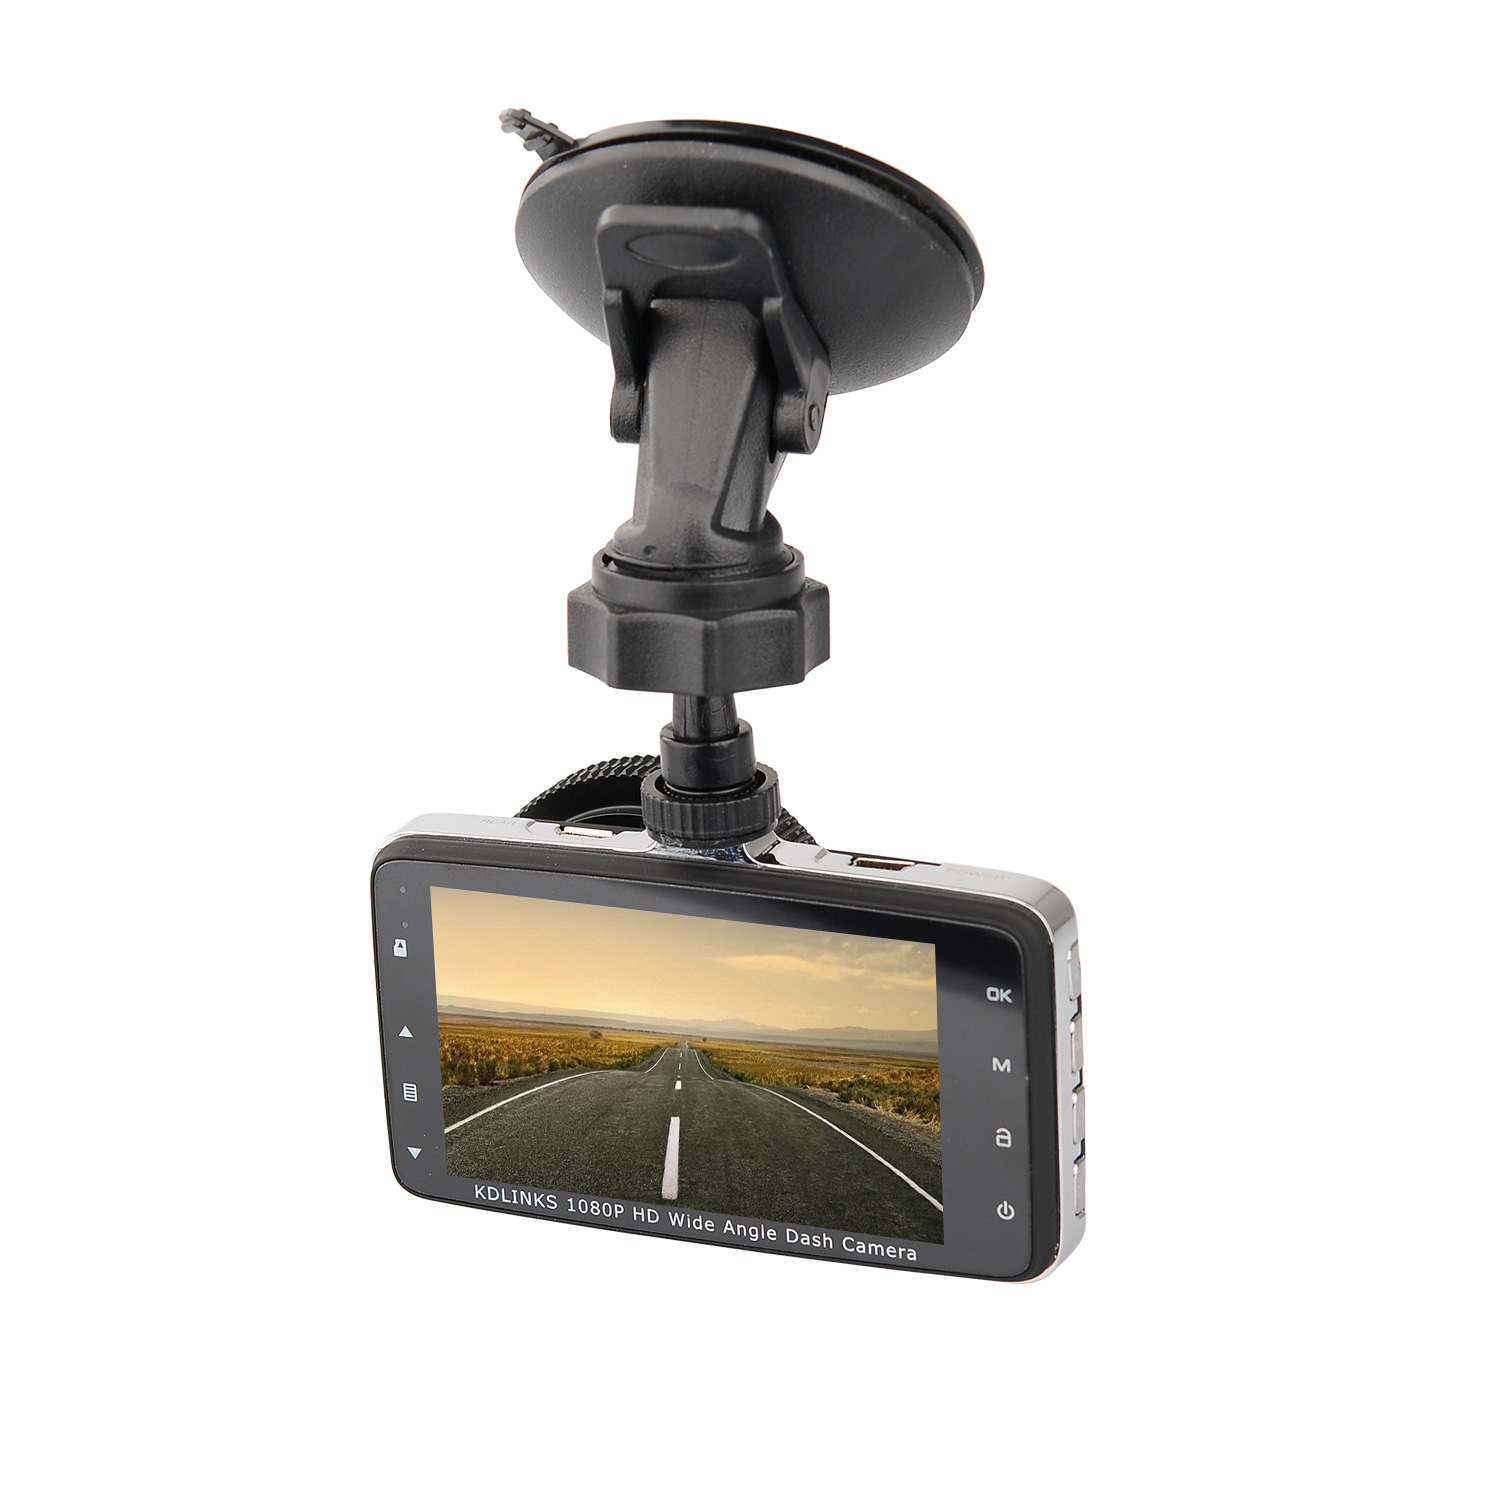 KDLINKS DX2 Full-HD 1080P Front + 720P Rear 290 Degree Super Wide Angle Car Dash Cam with G-Sensor & WDR Superior Night Mode - image 3 of 6